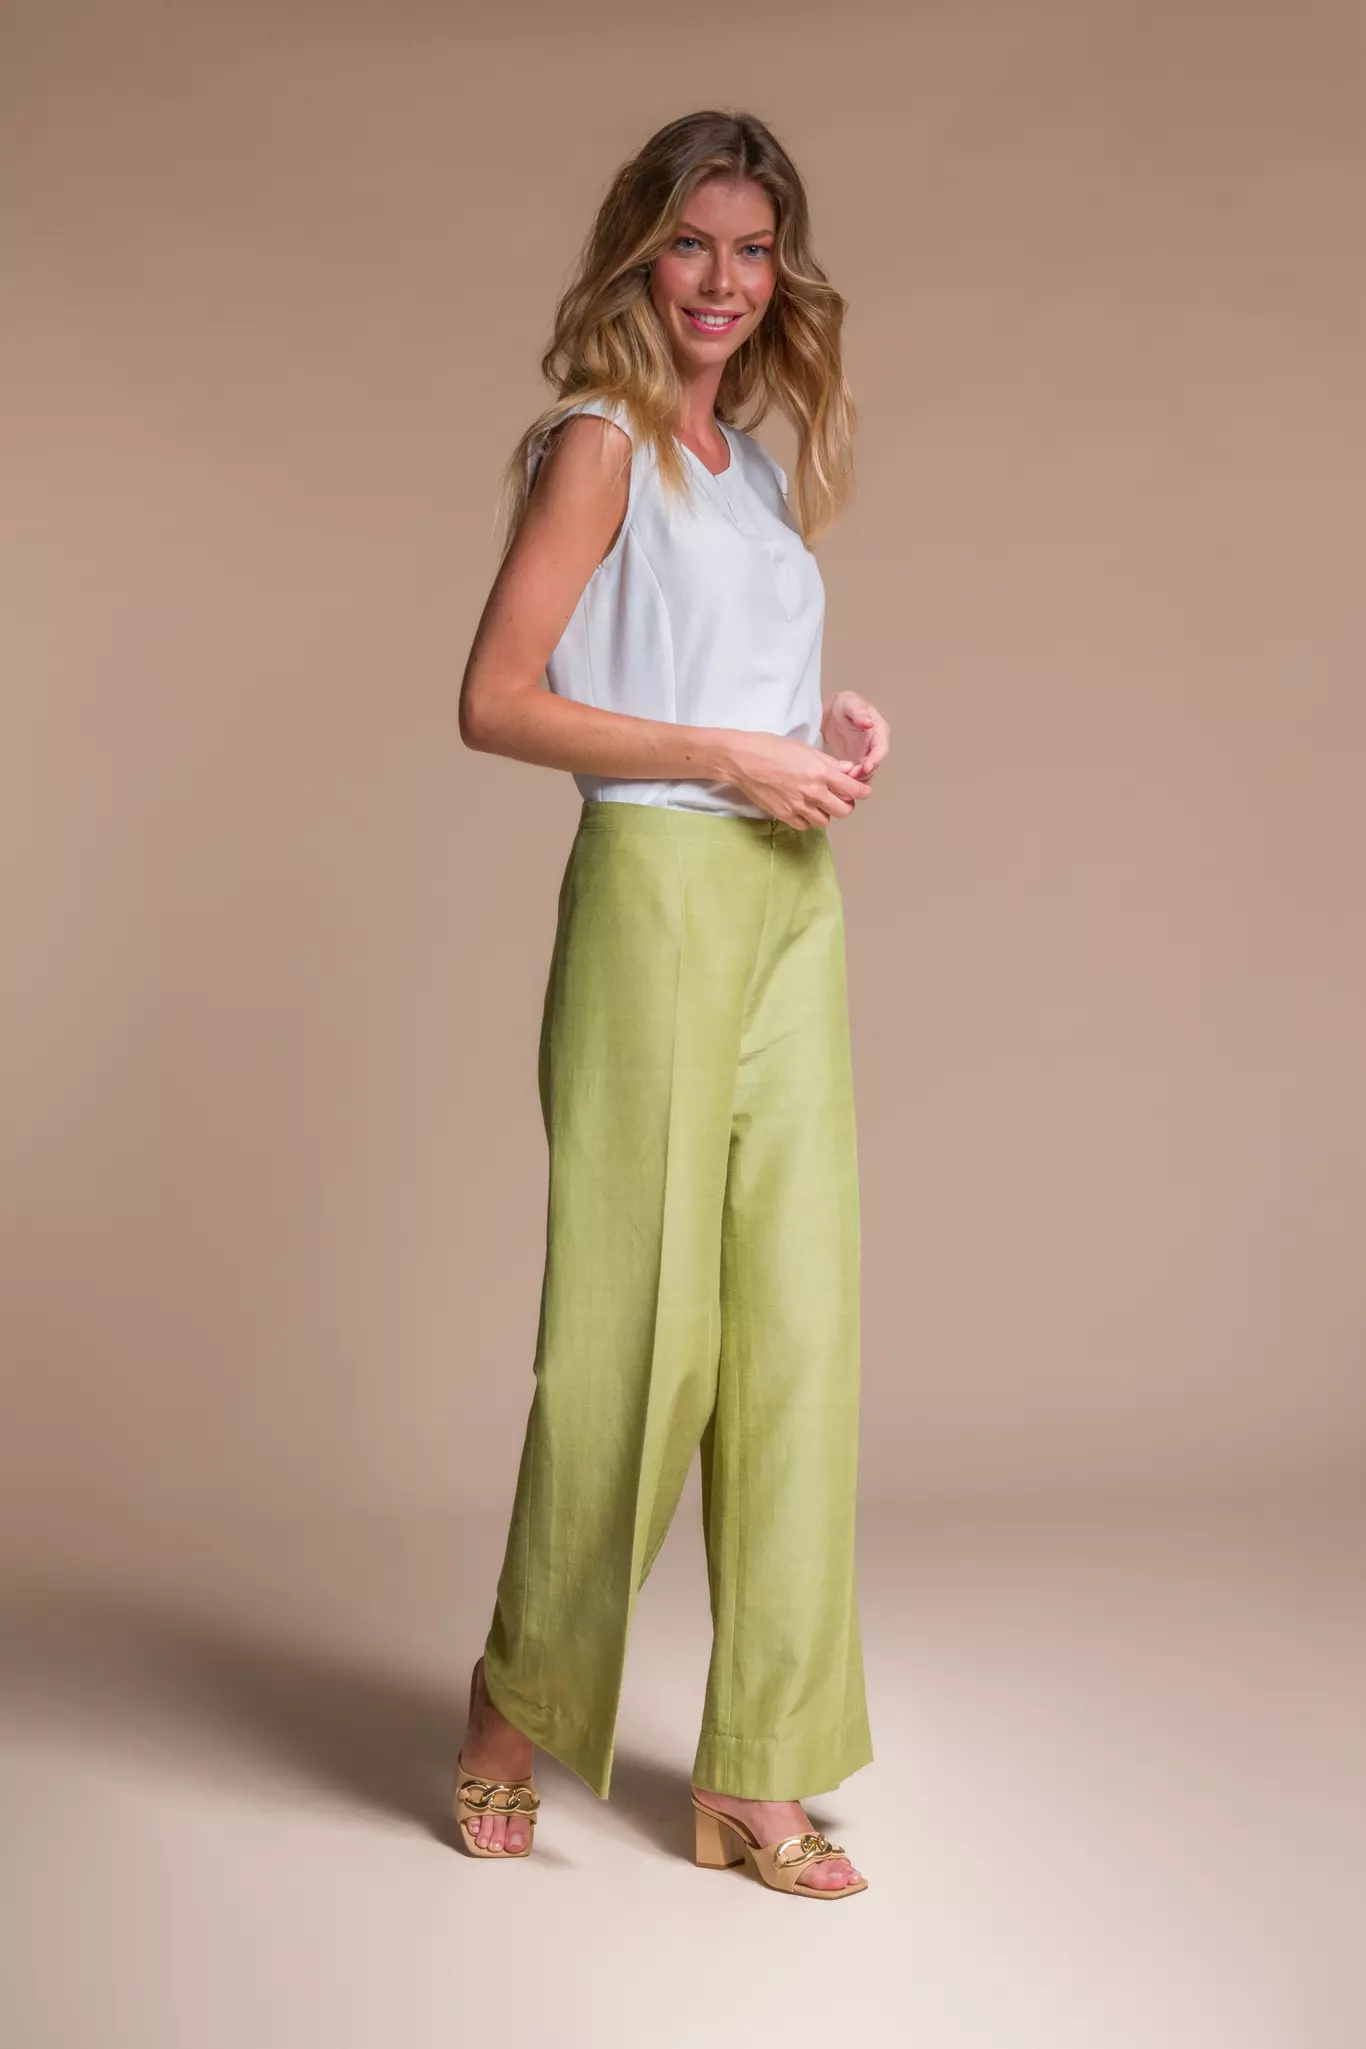 Albaray Military Pocket Organic Cotton Trousers, Olive at John Lewis &  Partners